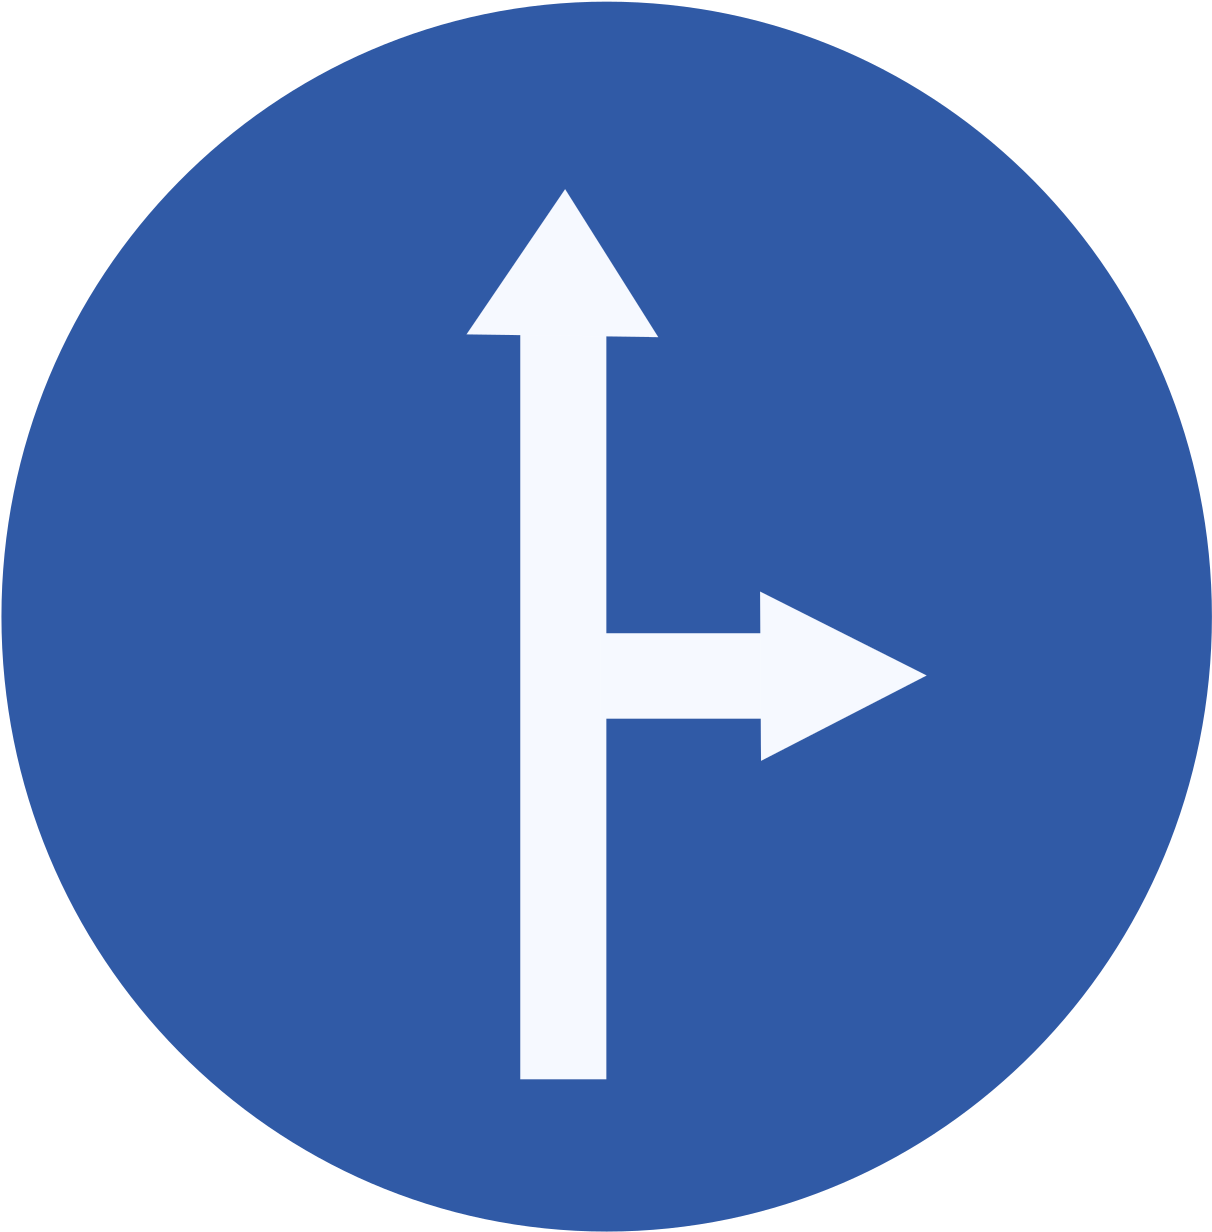 A Blue Circle With White Arrows Pointing To Two Sides